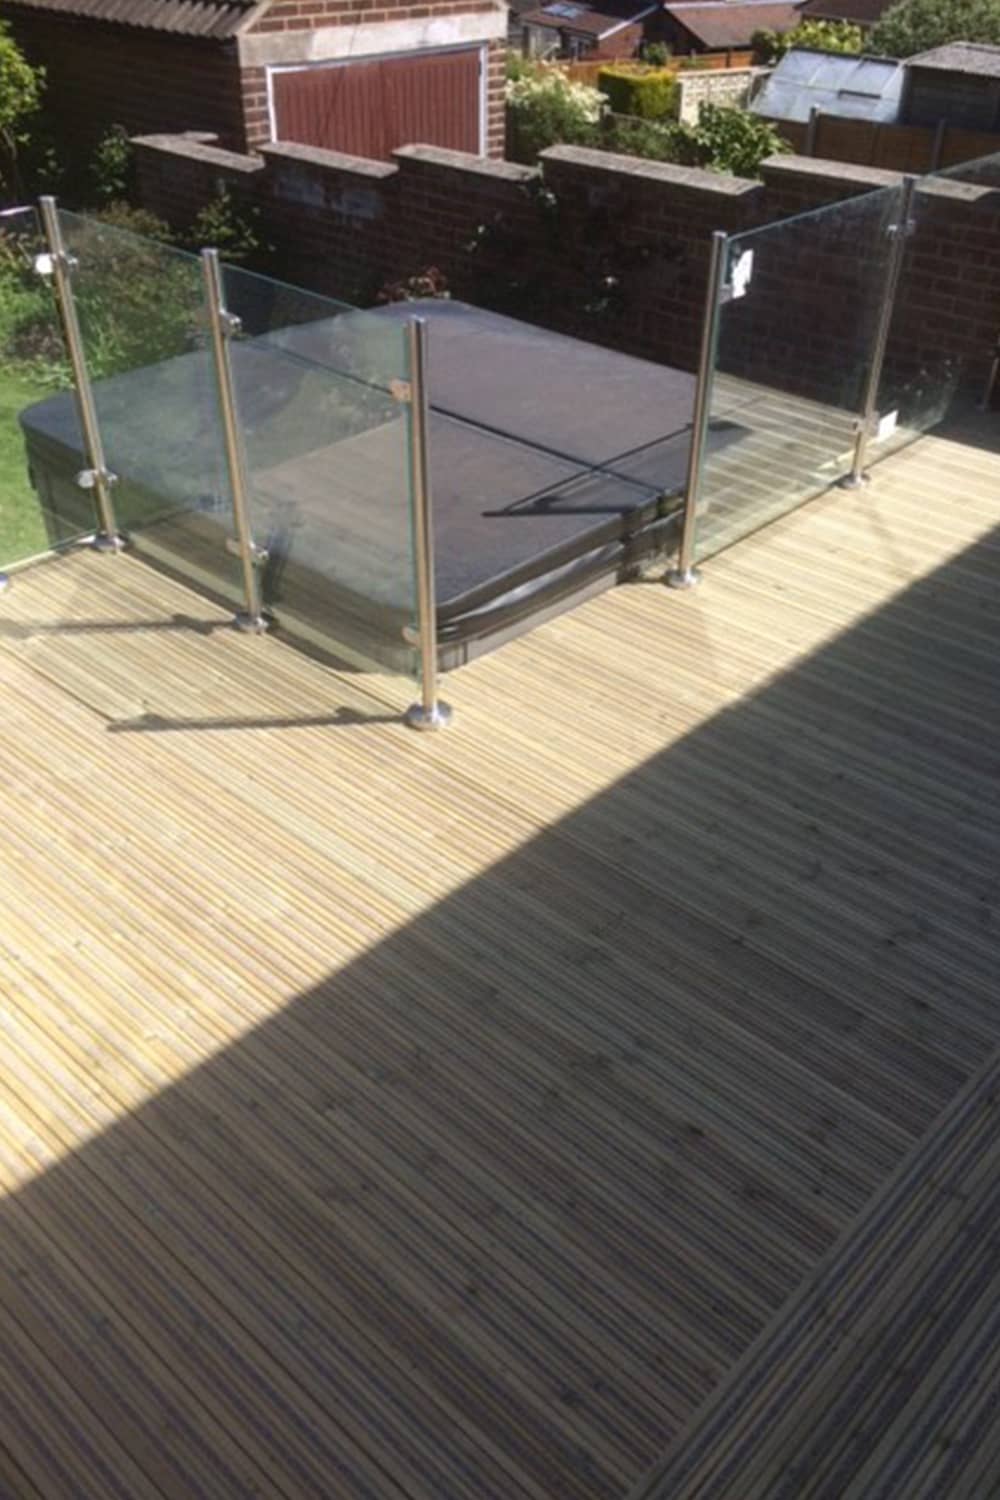 Why Timber Decking is Ideal for Hot Tubs